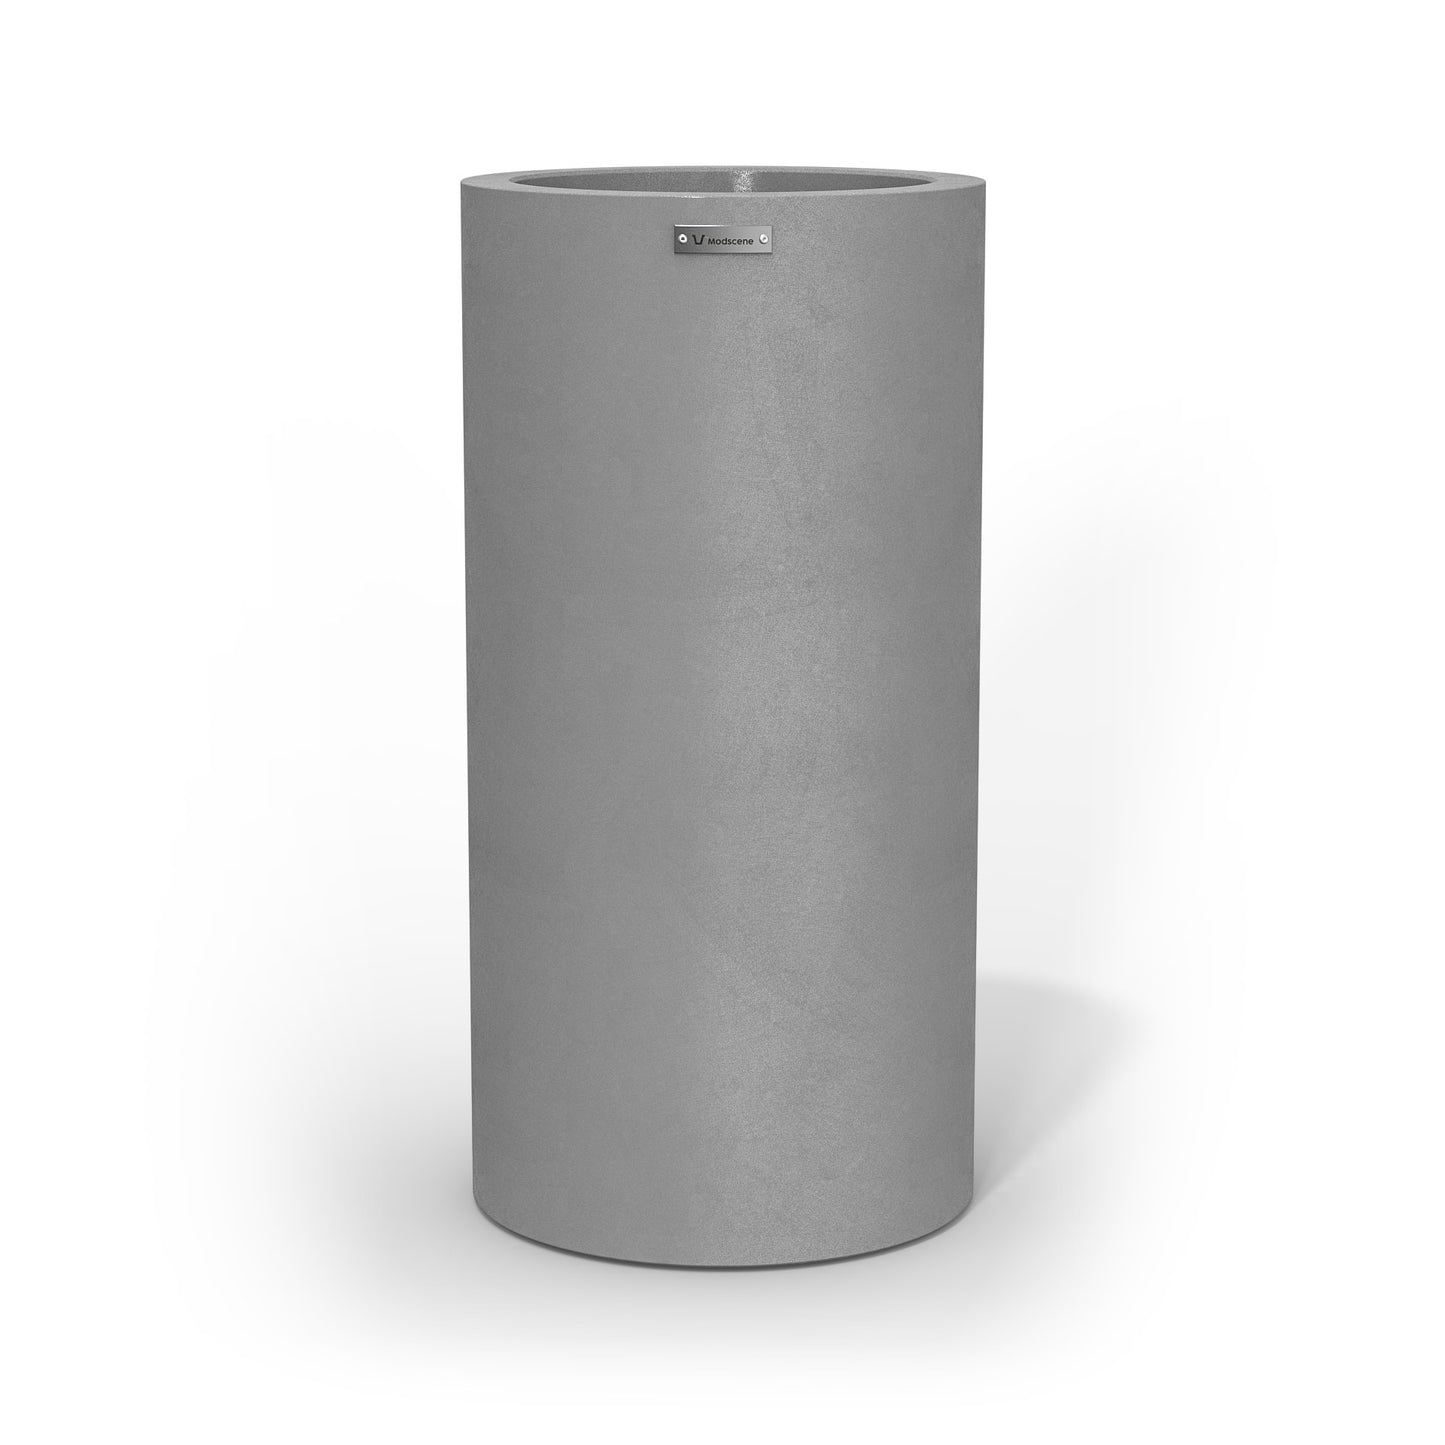 A tall cigar cylinder planter pot in a concrete grey colour made by Modscene.